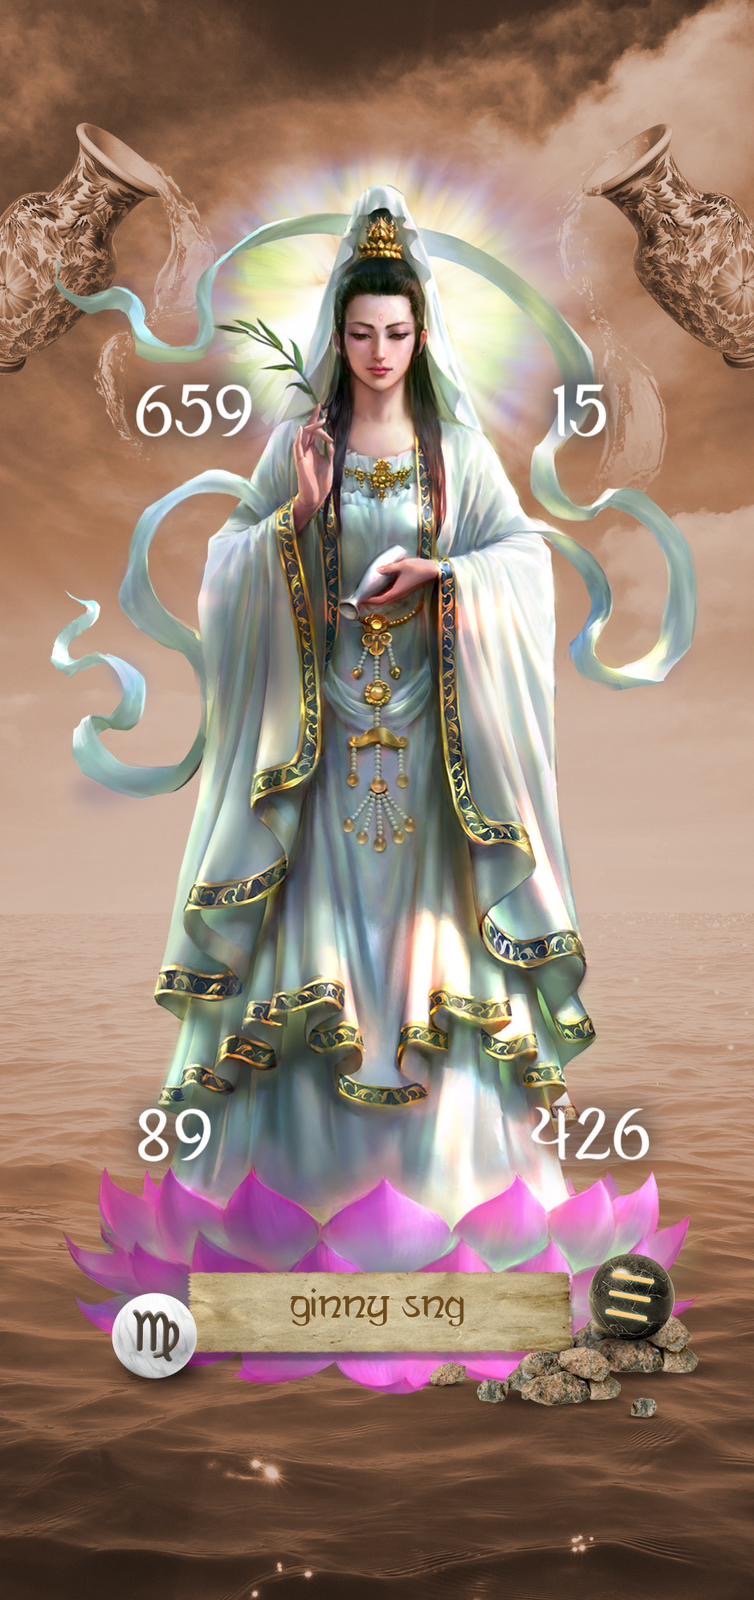 ❤️LOVING KINDNESS❤️Expert astrologists in Thailand have collaborated to create a special digital wallpaper for all phone models, featuring a customized image of GUANYIN BODHISATTVA